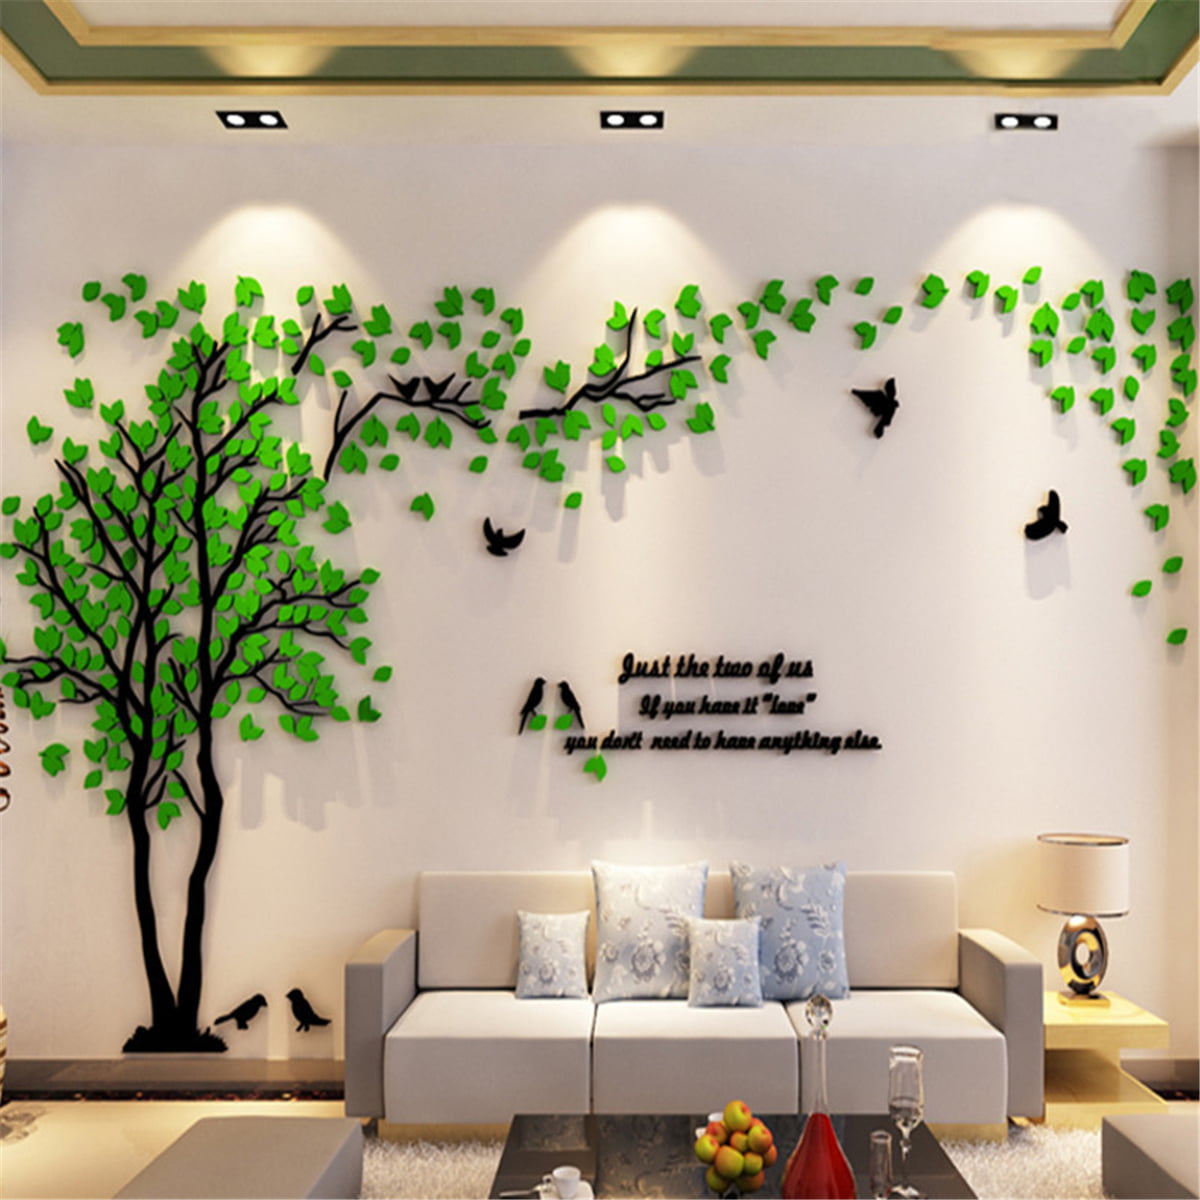 Large Family Tree Wall Decals 3D DIY Acrylic Wall Stickers Mural Home Decor HOT!